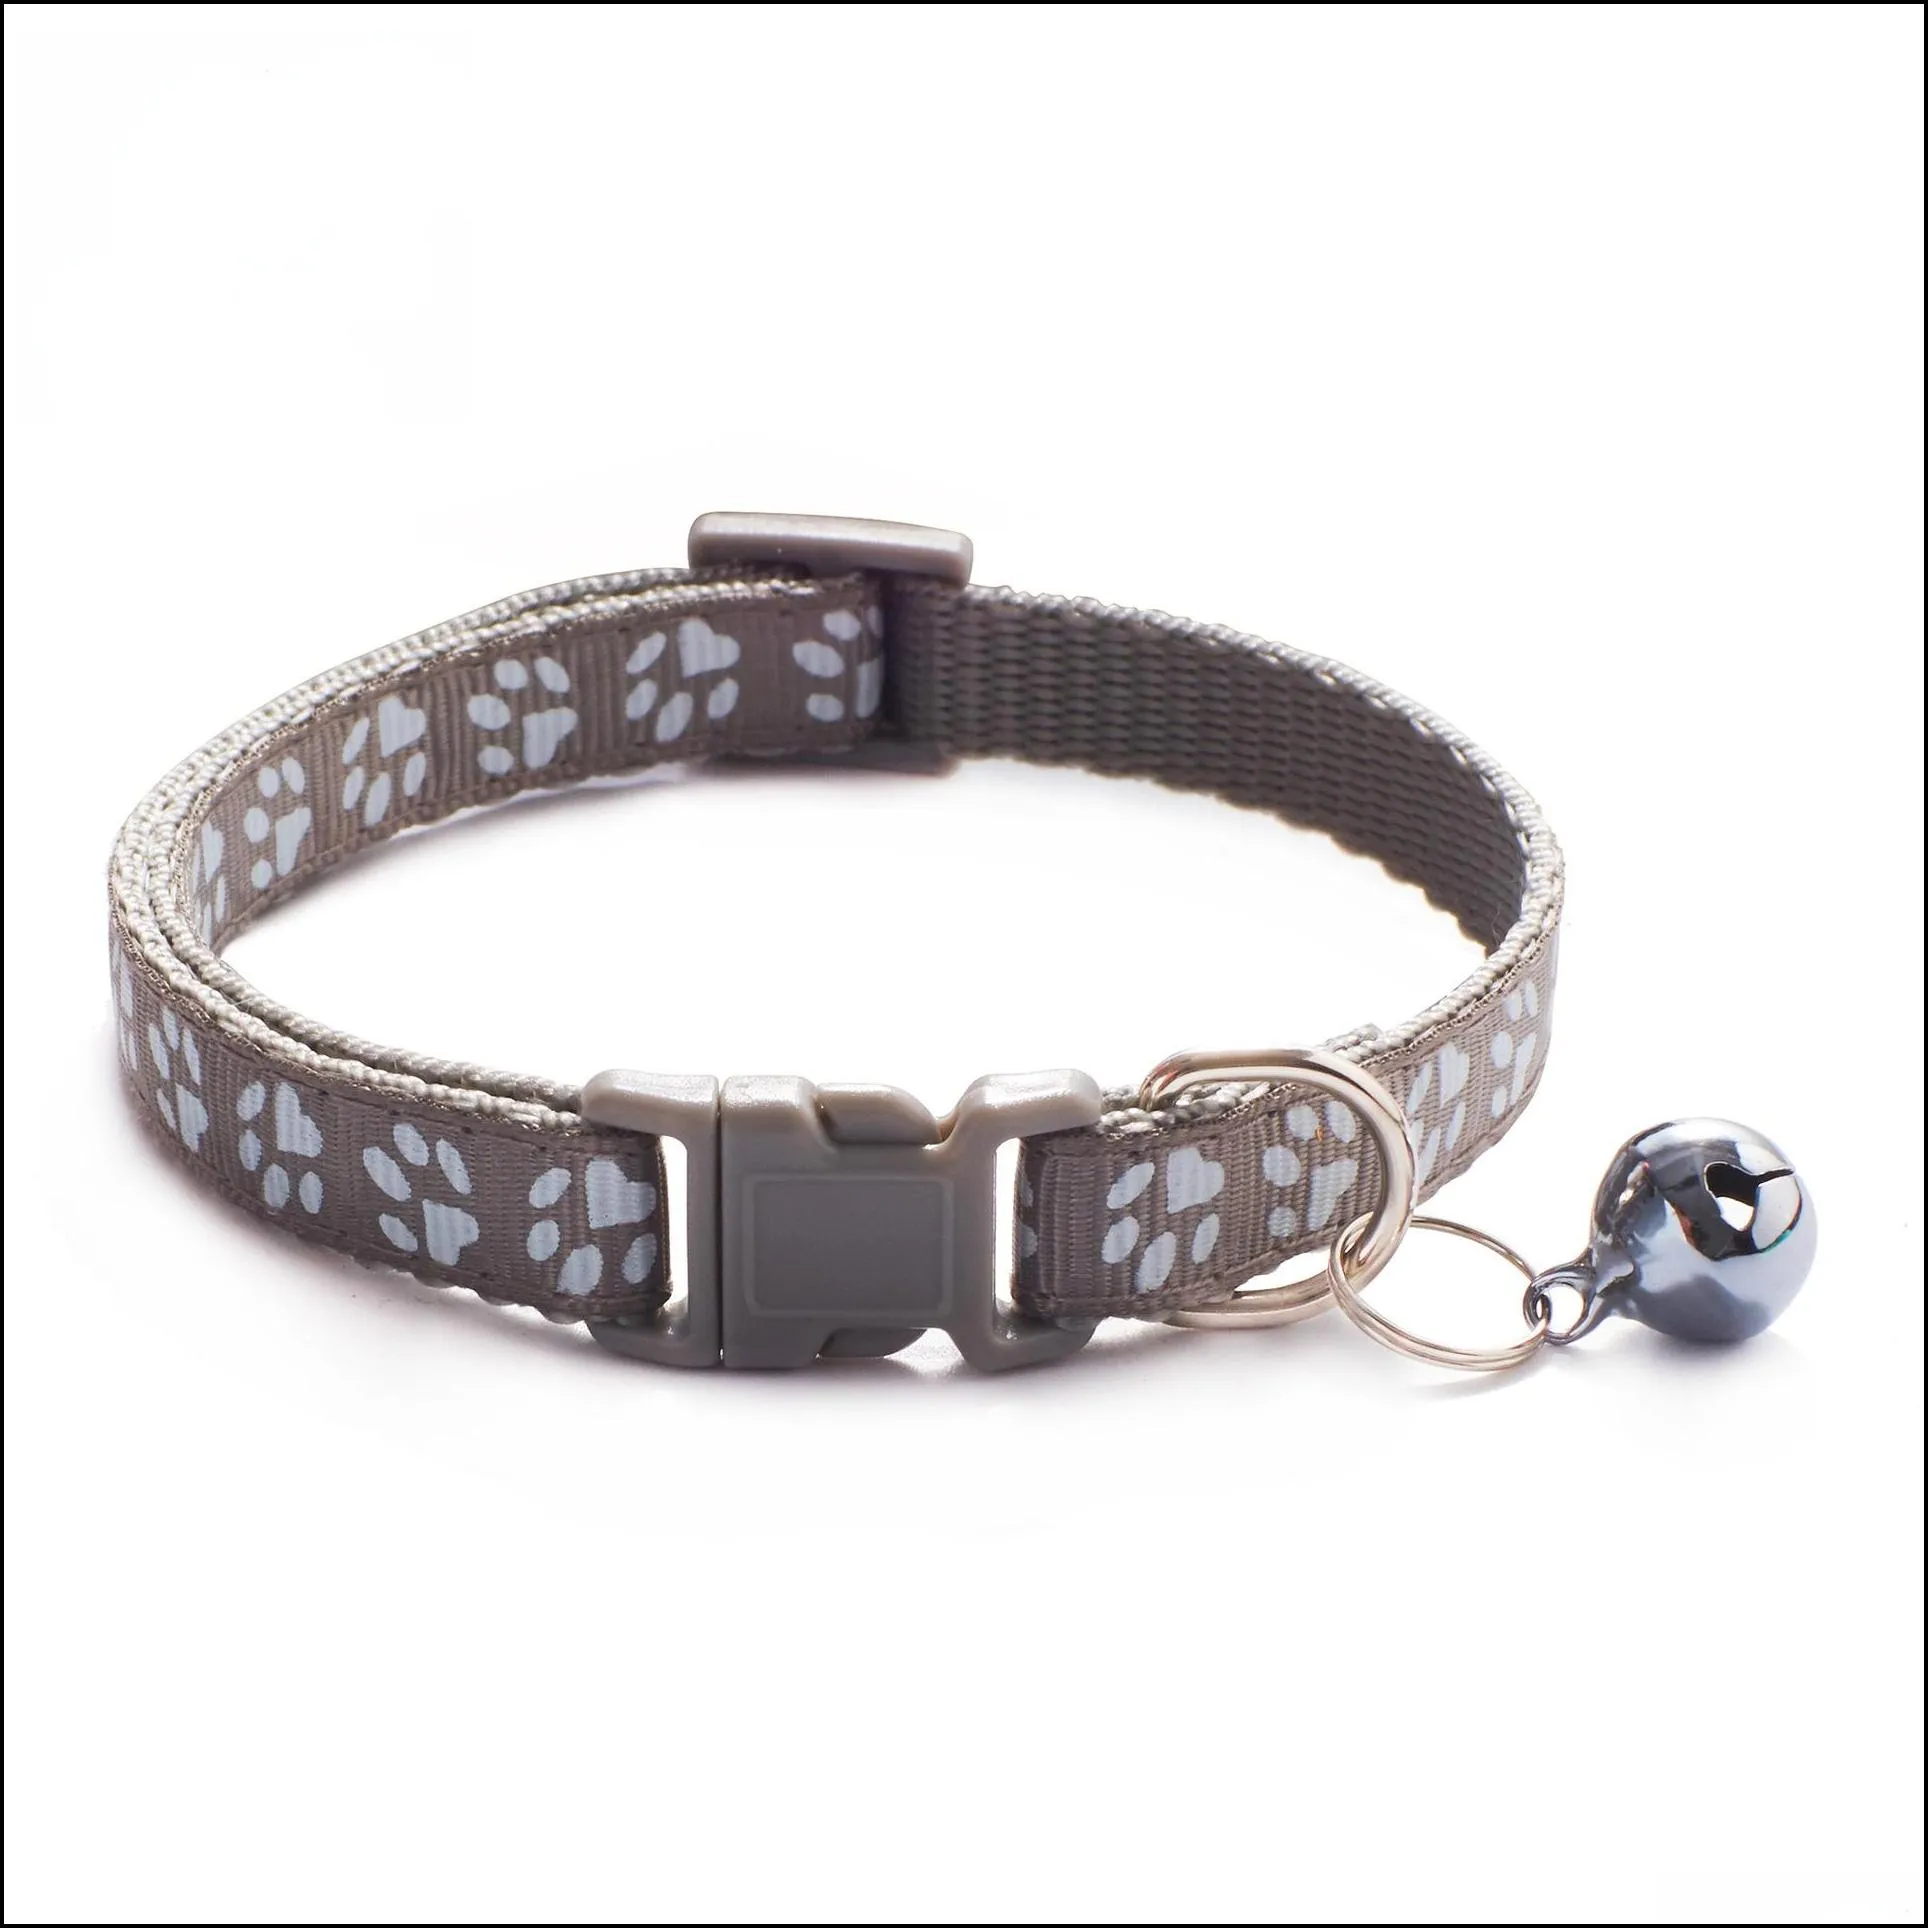 cartoon dog collars with bell adjustable polyester cats head buckle reflective collar small size puppy pet supplies